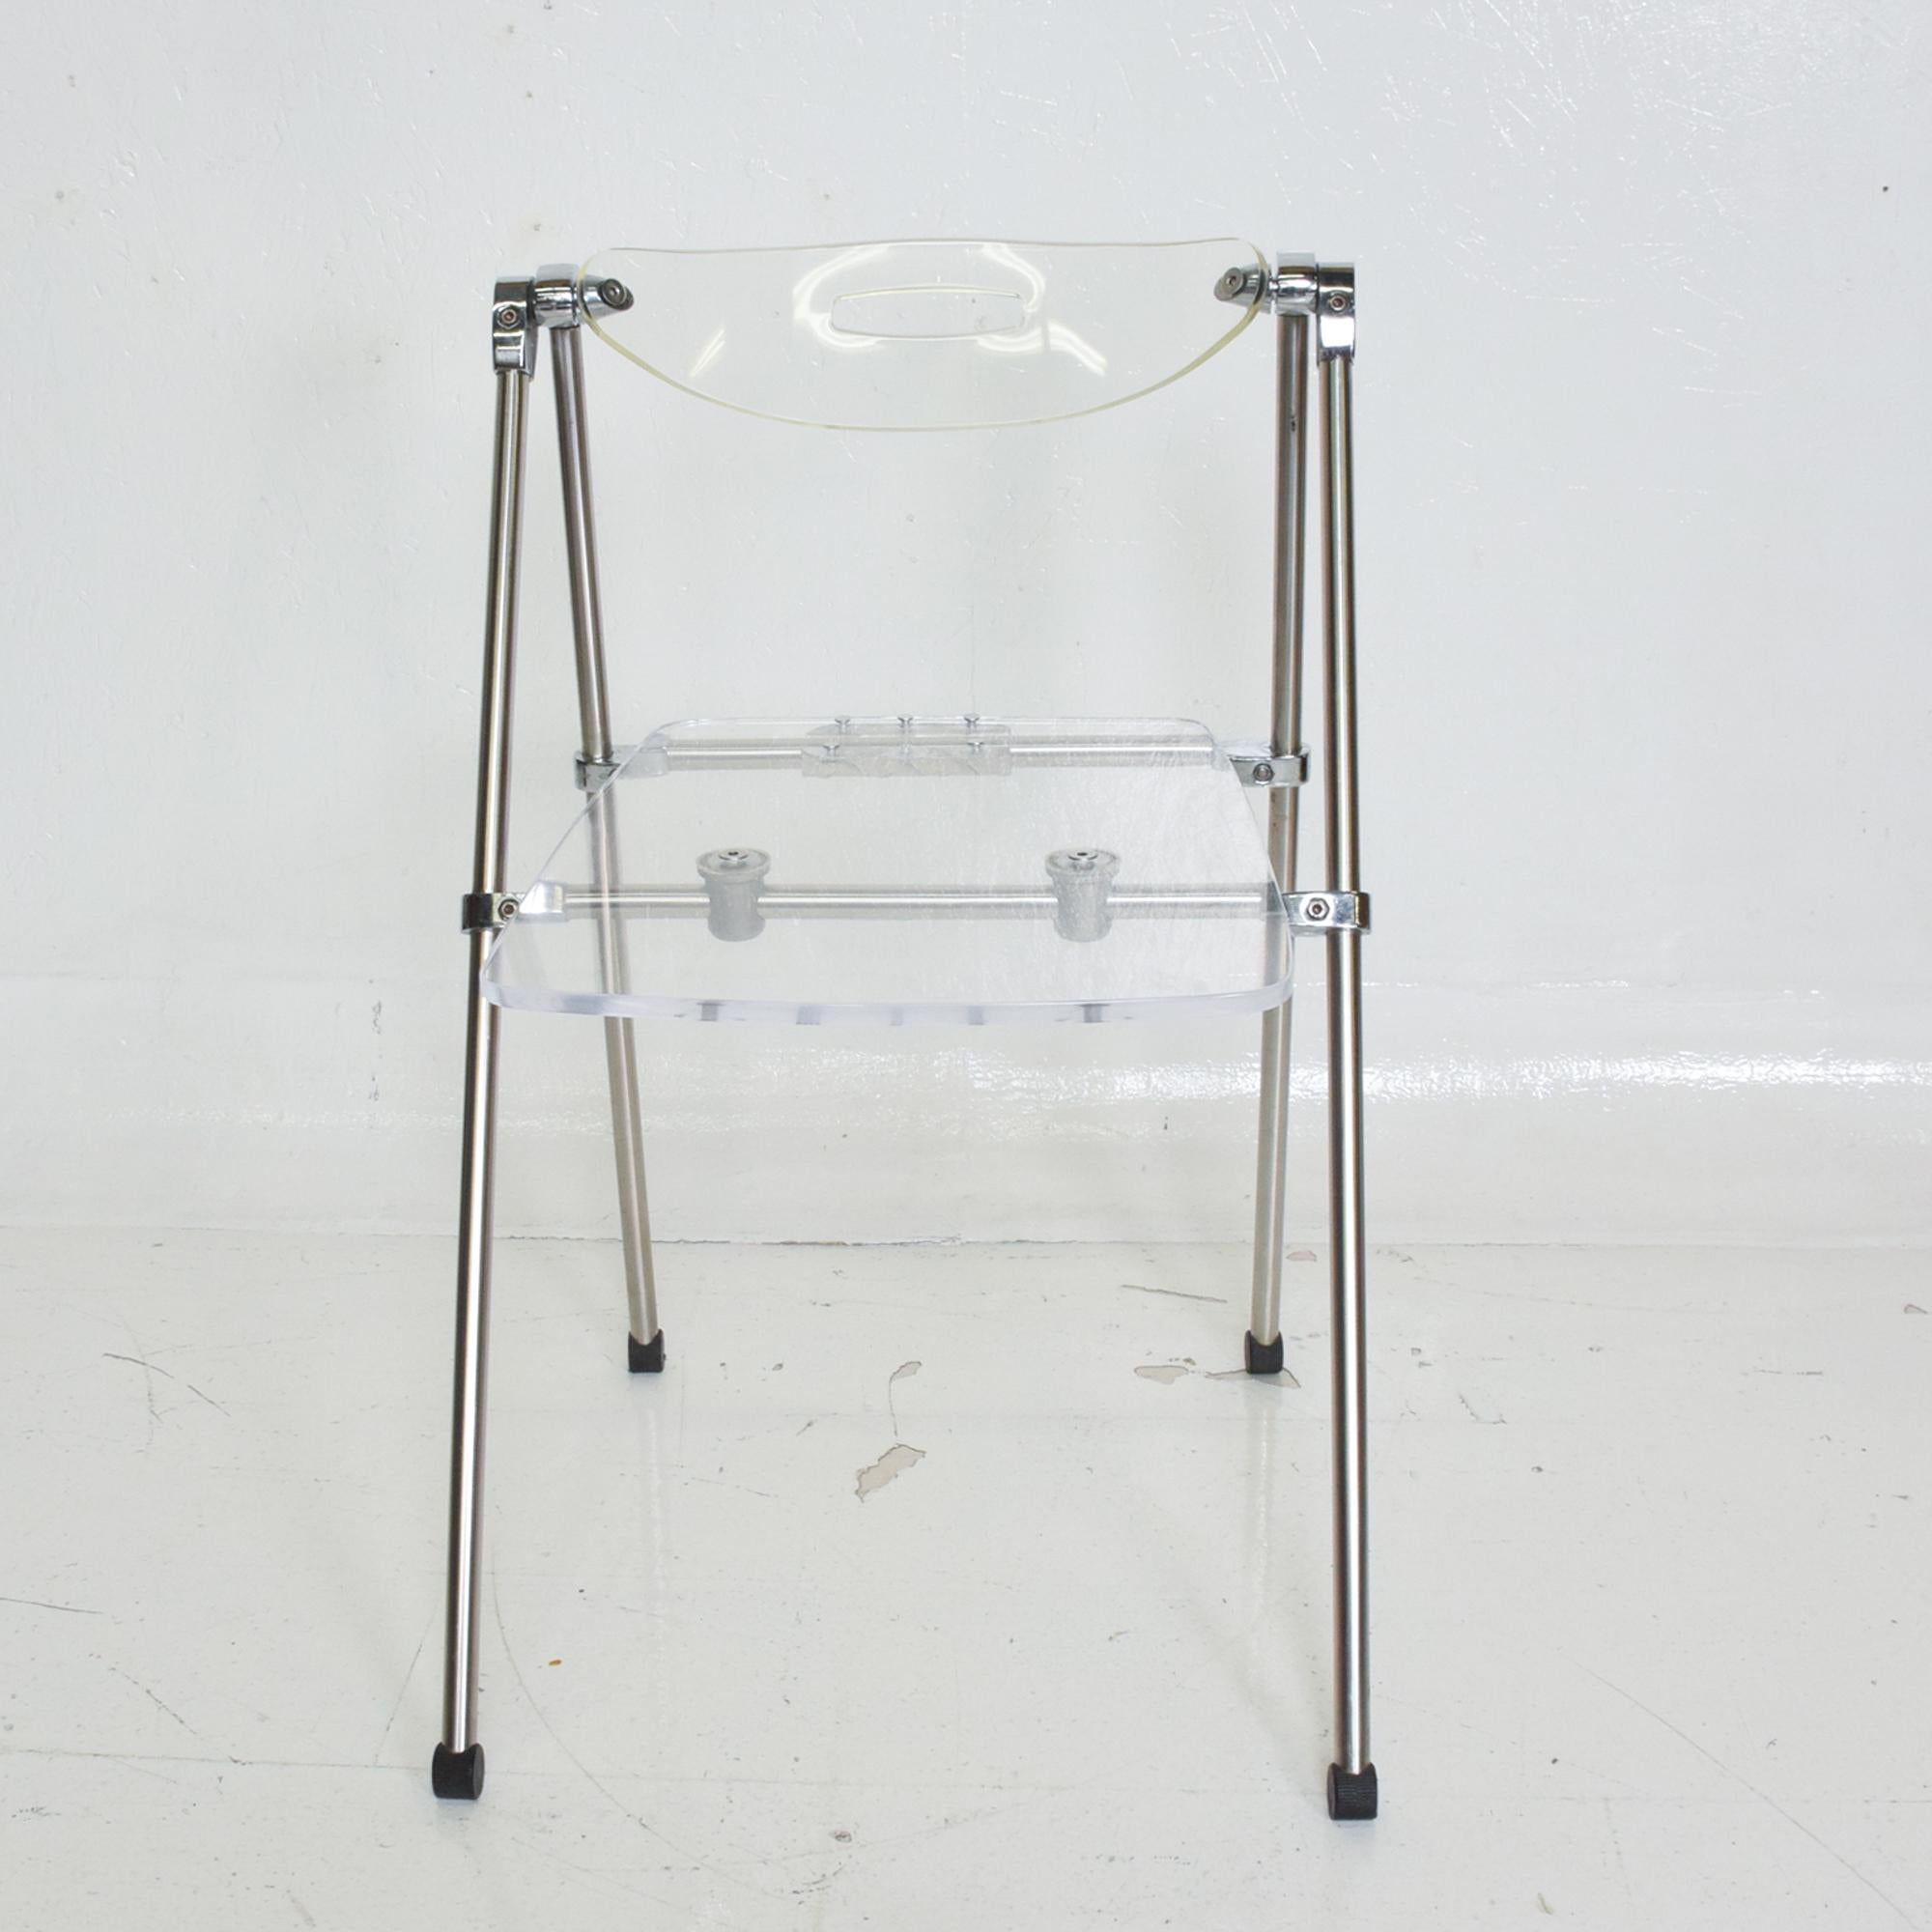 For your consideration: Modern single occasional folding lucite chair with chrome frame after Giancarlo Piretti Castelli Plia folding chair.
Fair. The original seat was replaced with a new Lucite seat and Aluminum support.
Backrest has a stress